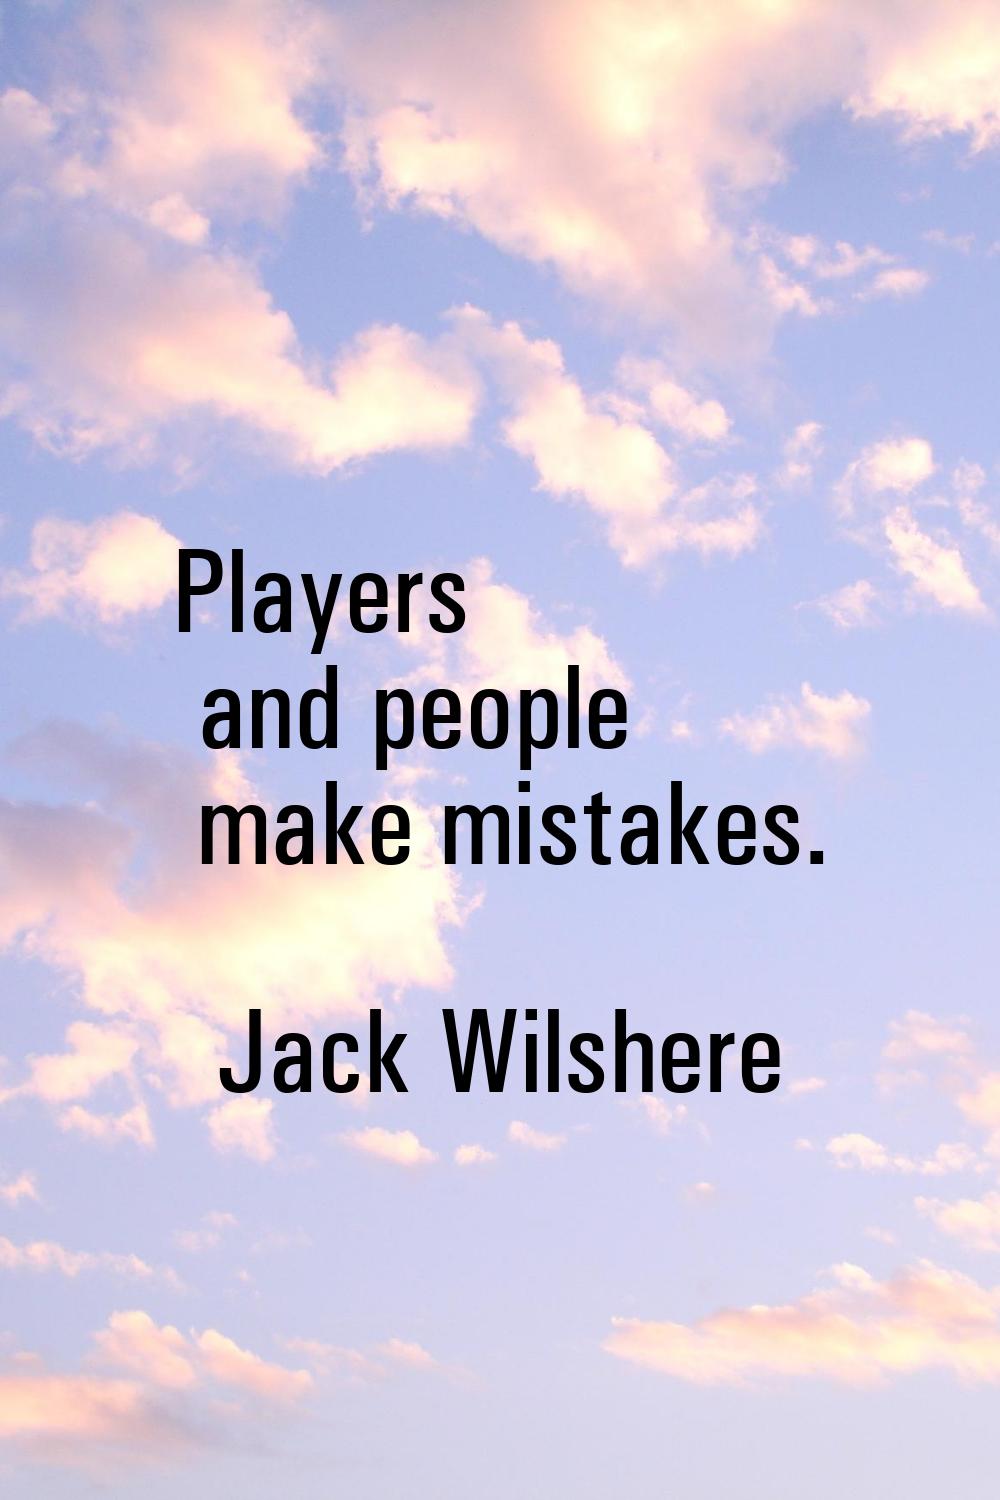 Players and people make mistakes.